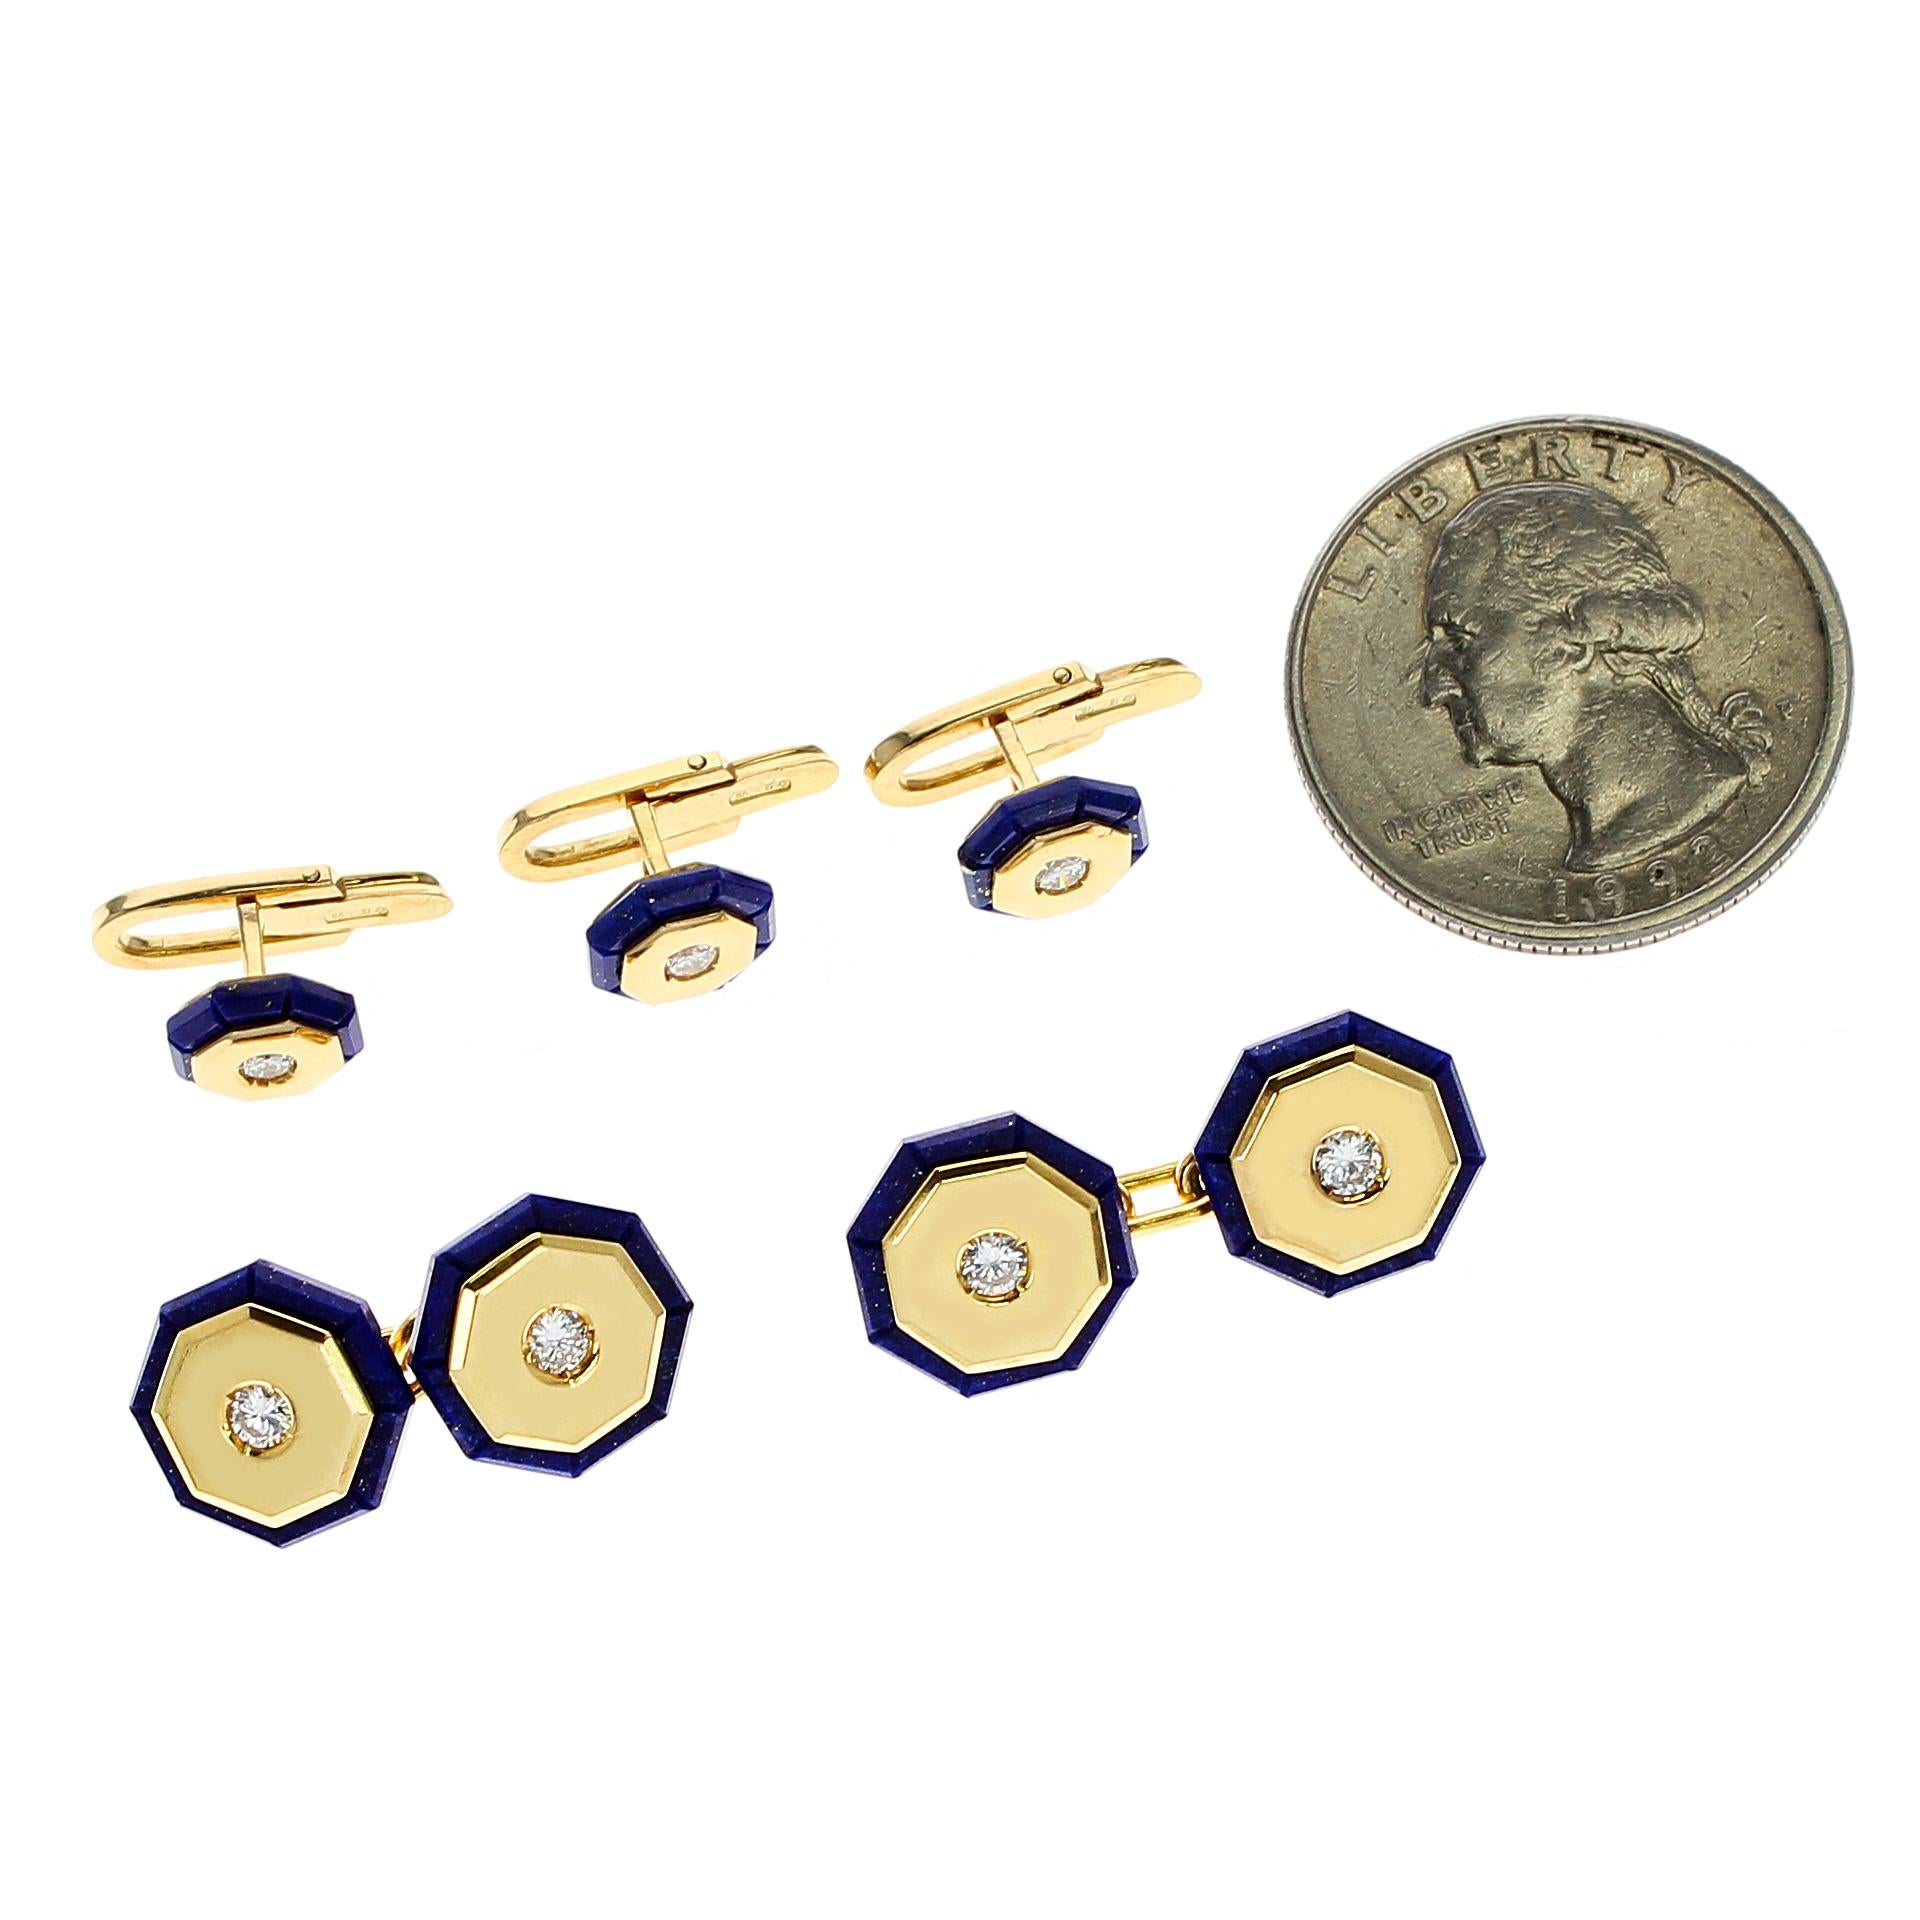 A Lapis and Gold Dress Shirt Pins and Cufflink Set stamped 18K and Italy. The total weight is 14.91 grams. There are 2 pairs of cufflinks (1.1CM each) and 3 shirt pins (0.70CM each)
